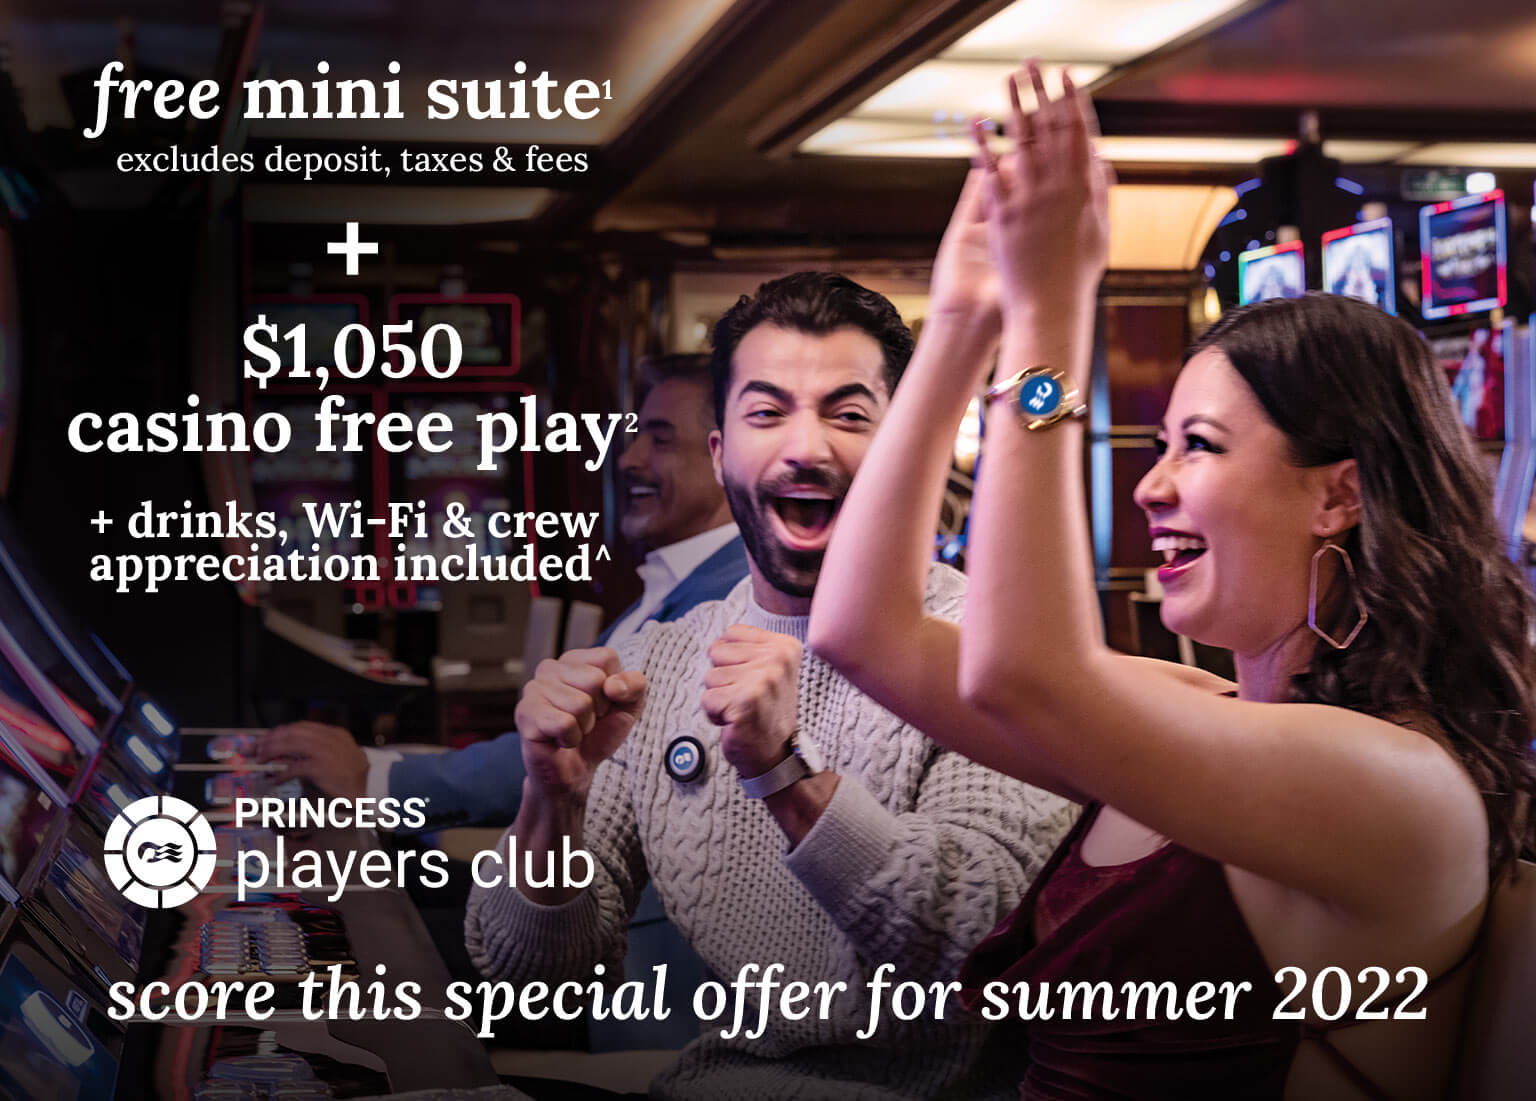 free mini-suite + $1,050 casino free play + drinks, Wi-Fi & crew appreciation included. Click here to book.